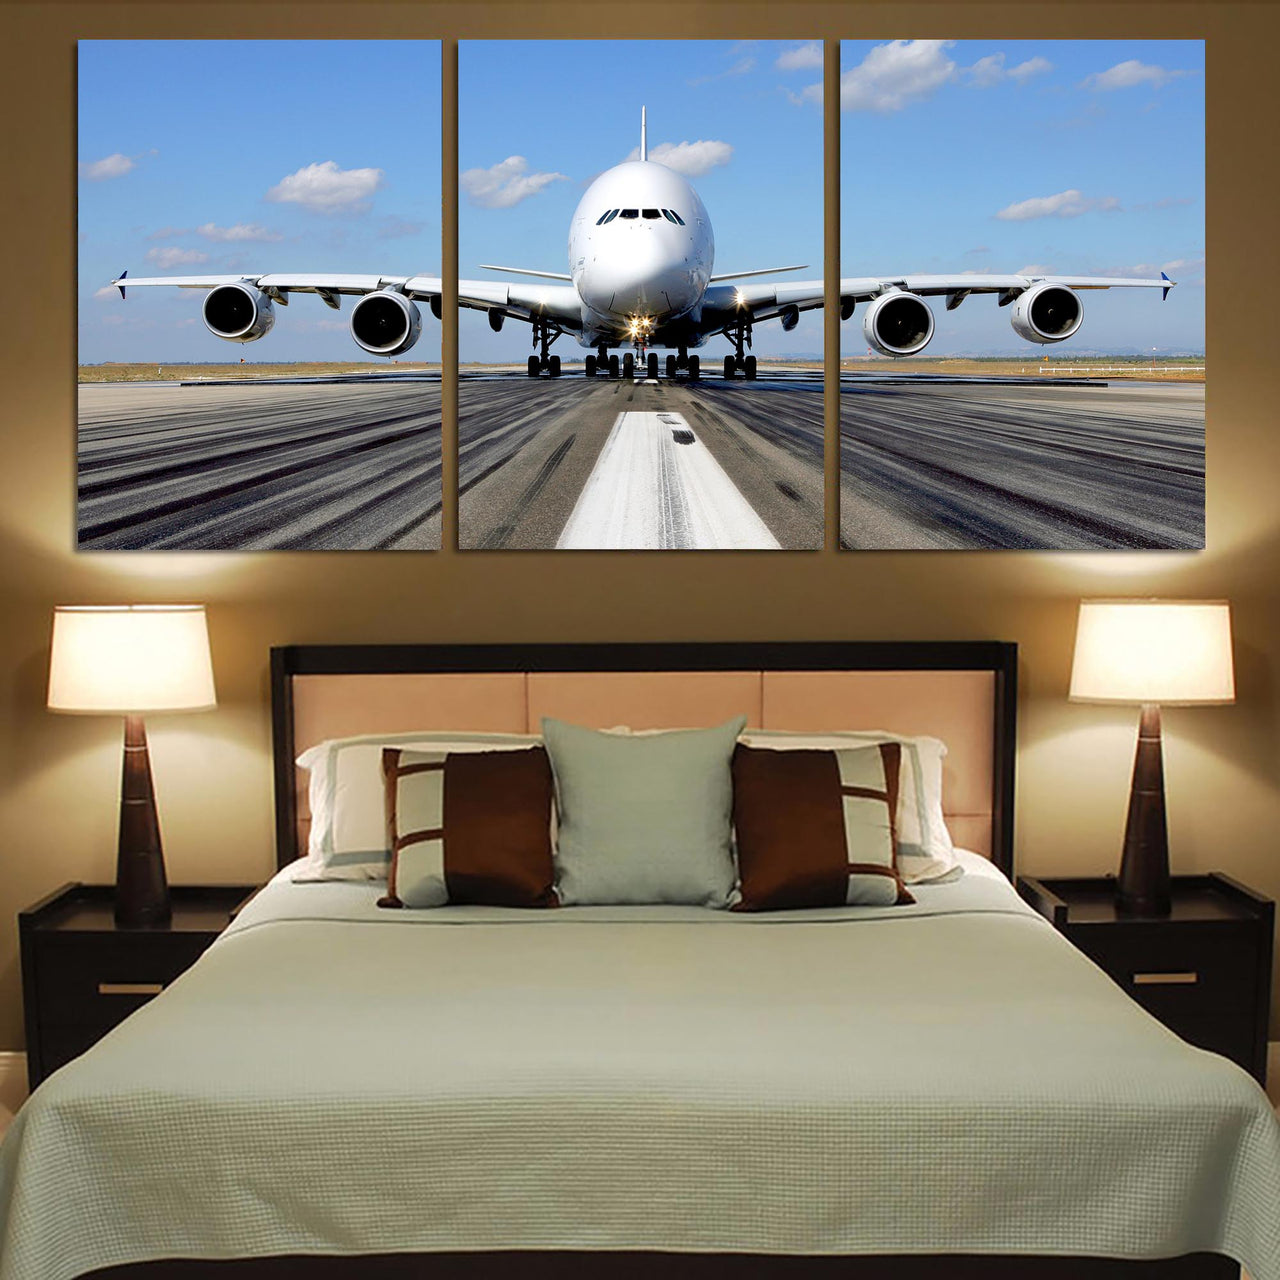 Mighty Airbus A380 Printed Canvas Posters (3 Pieces)